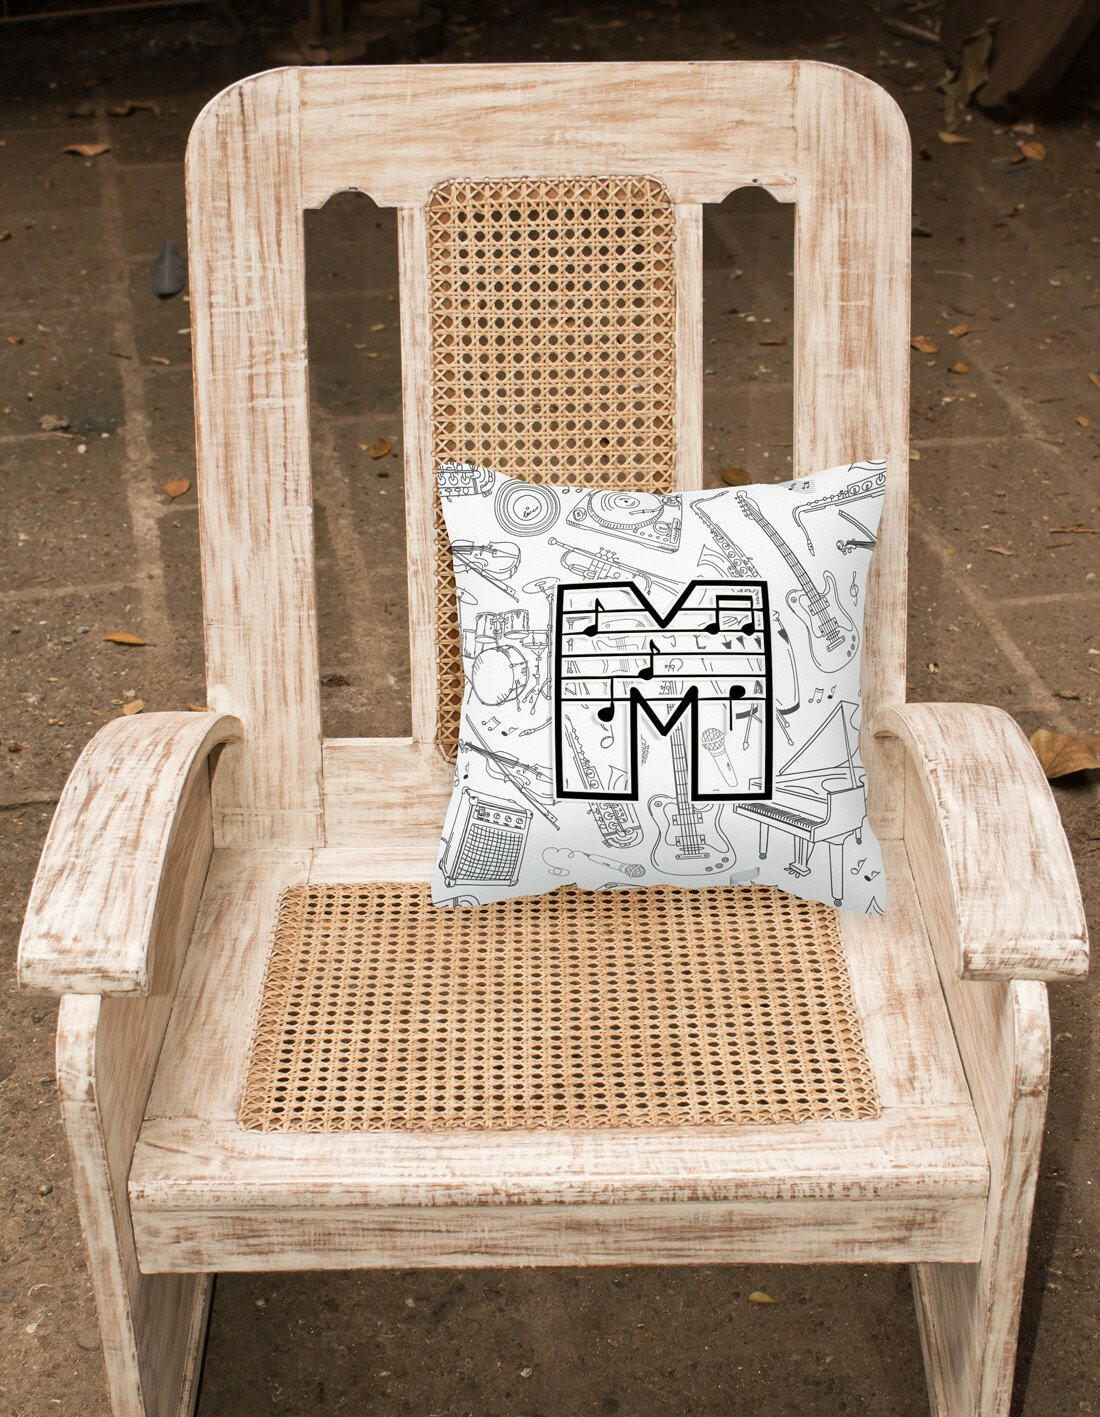 Letter M Musical Note Letters Canvas Fabric Decorative Pillow CJ2007-MPW1414 by Caroline's Treasures